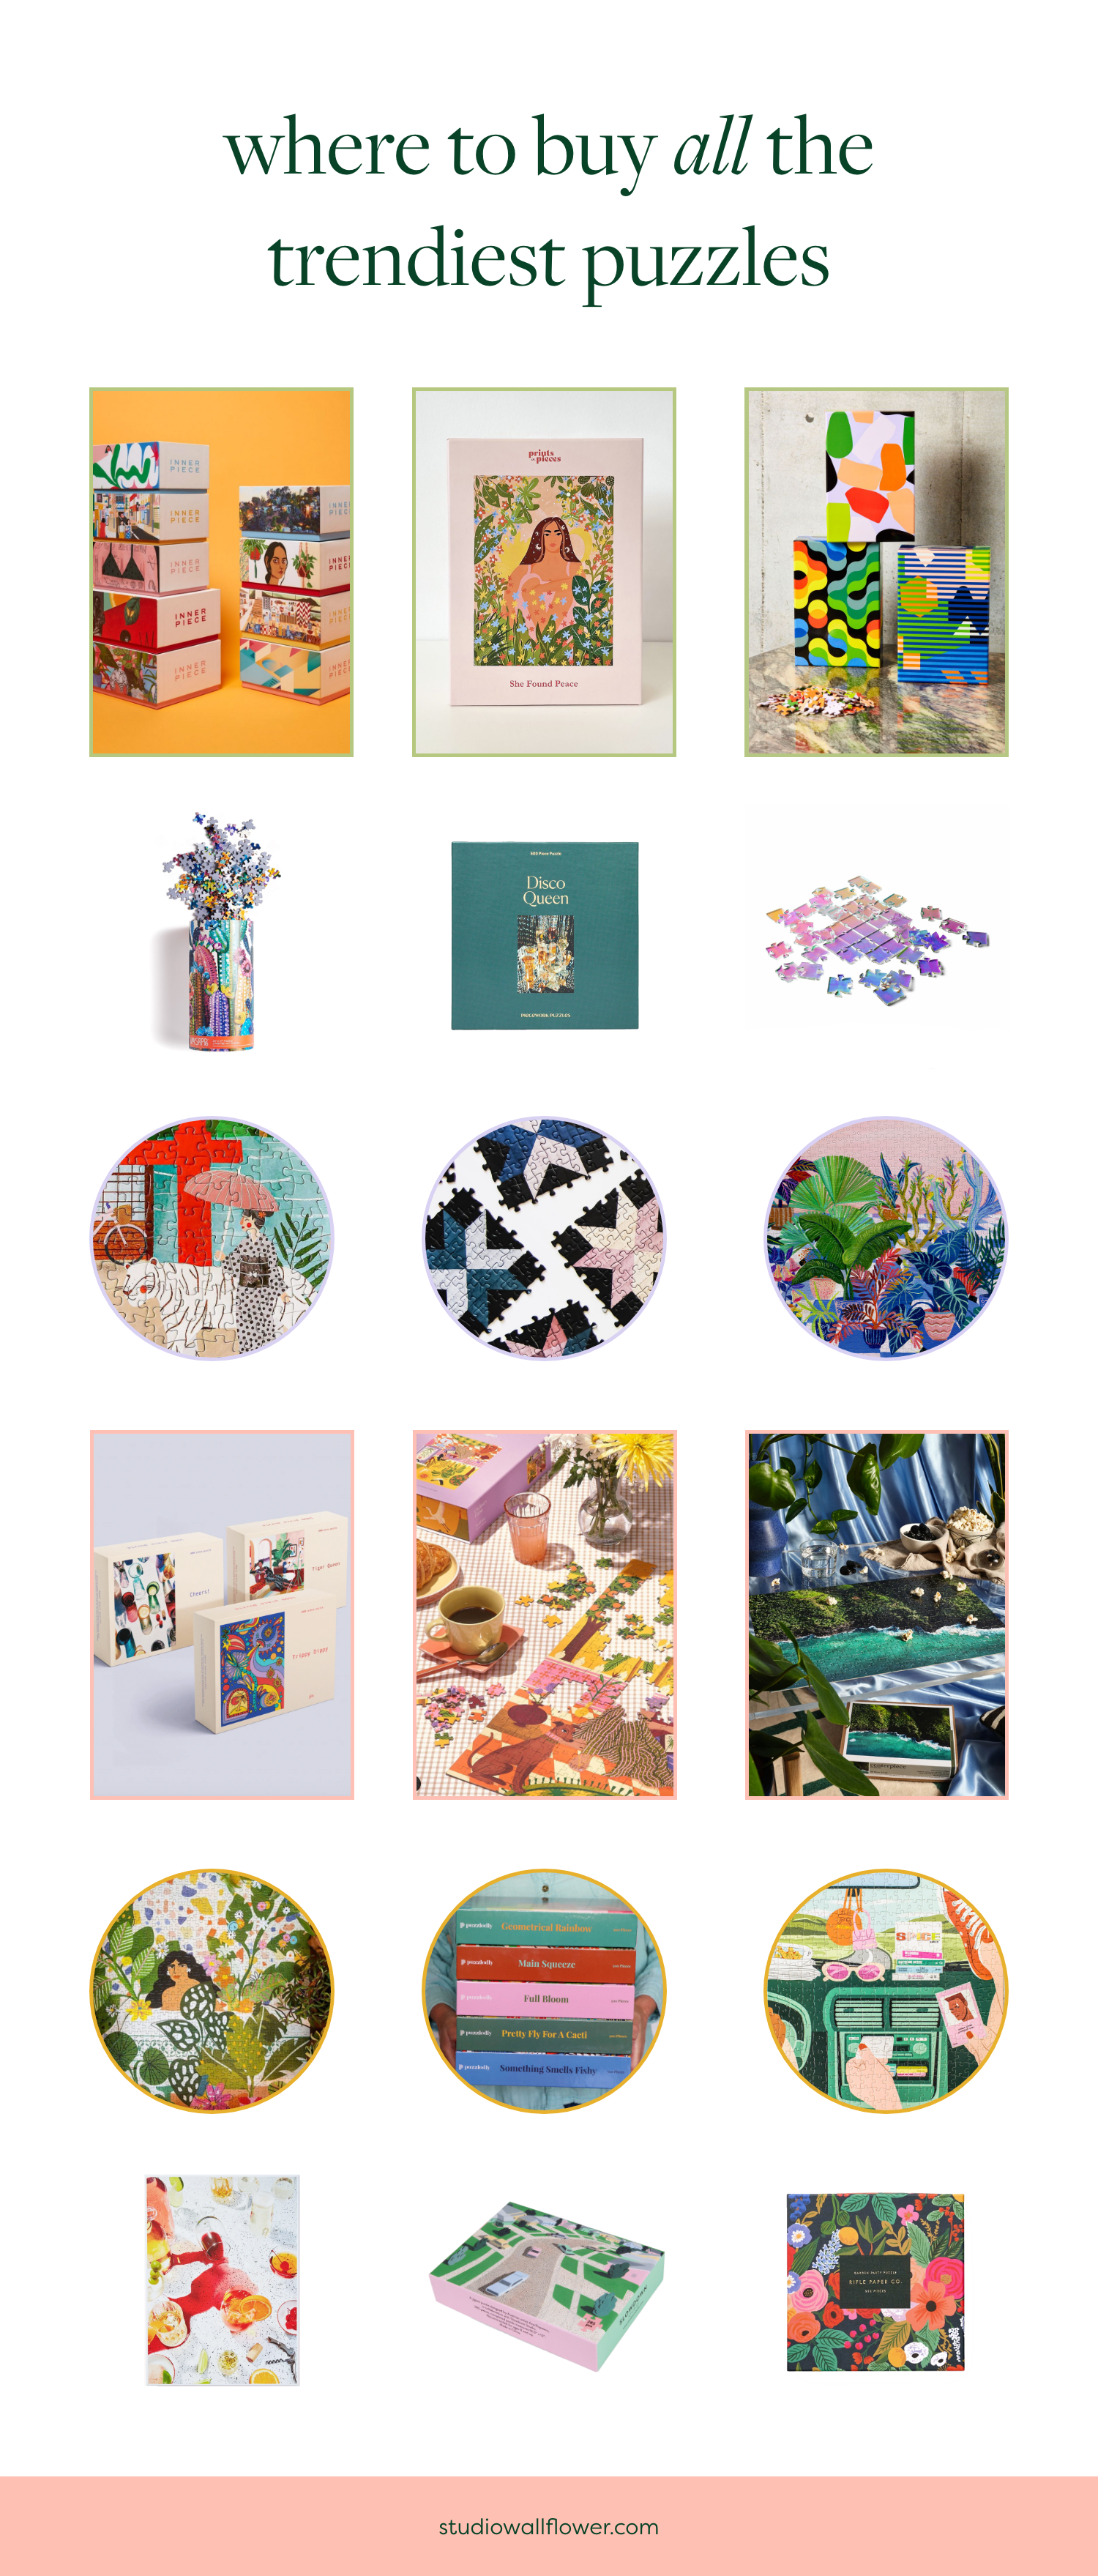 where to buy all the trendiest puzzles on instagram via wallflower